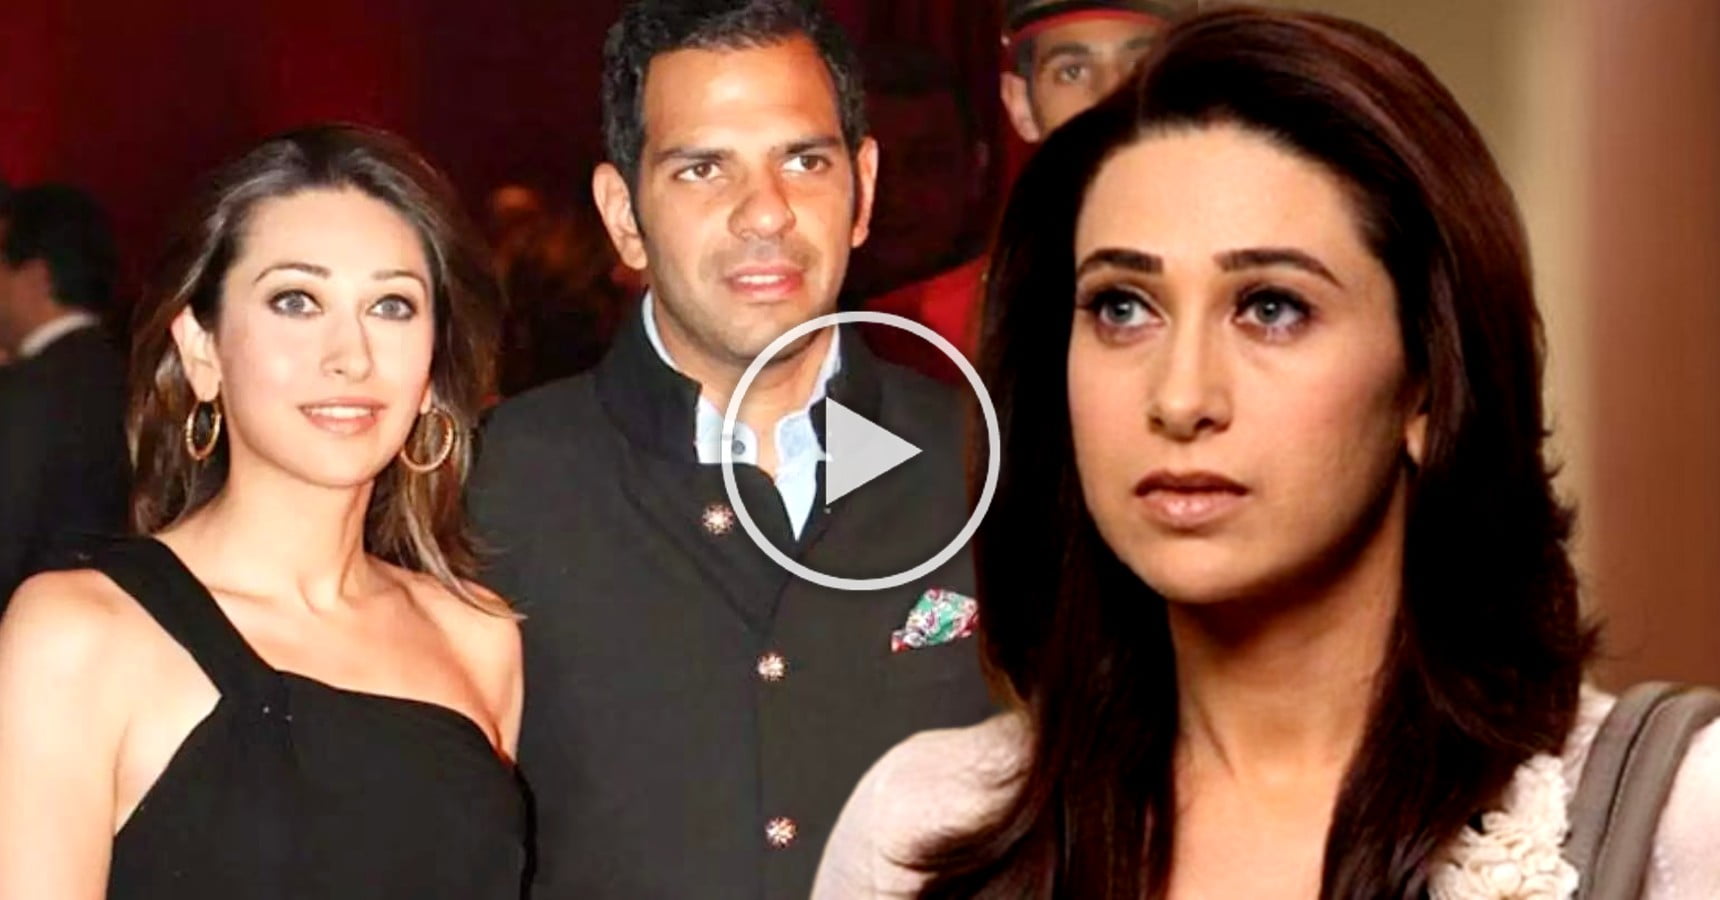 Bollywood actress Karishma Kapoor spotted on a dinner outing with ex-husband Sunjay Kapur